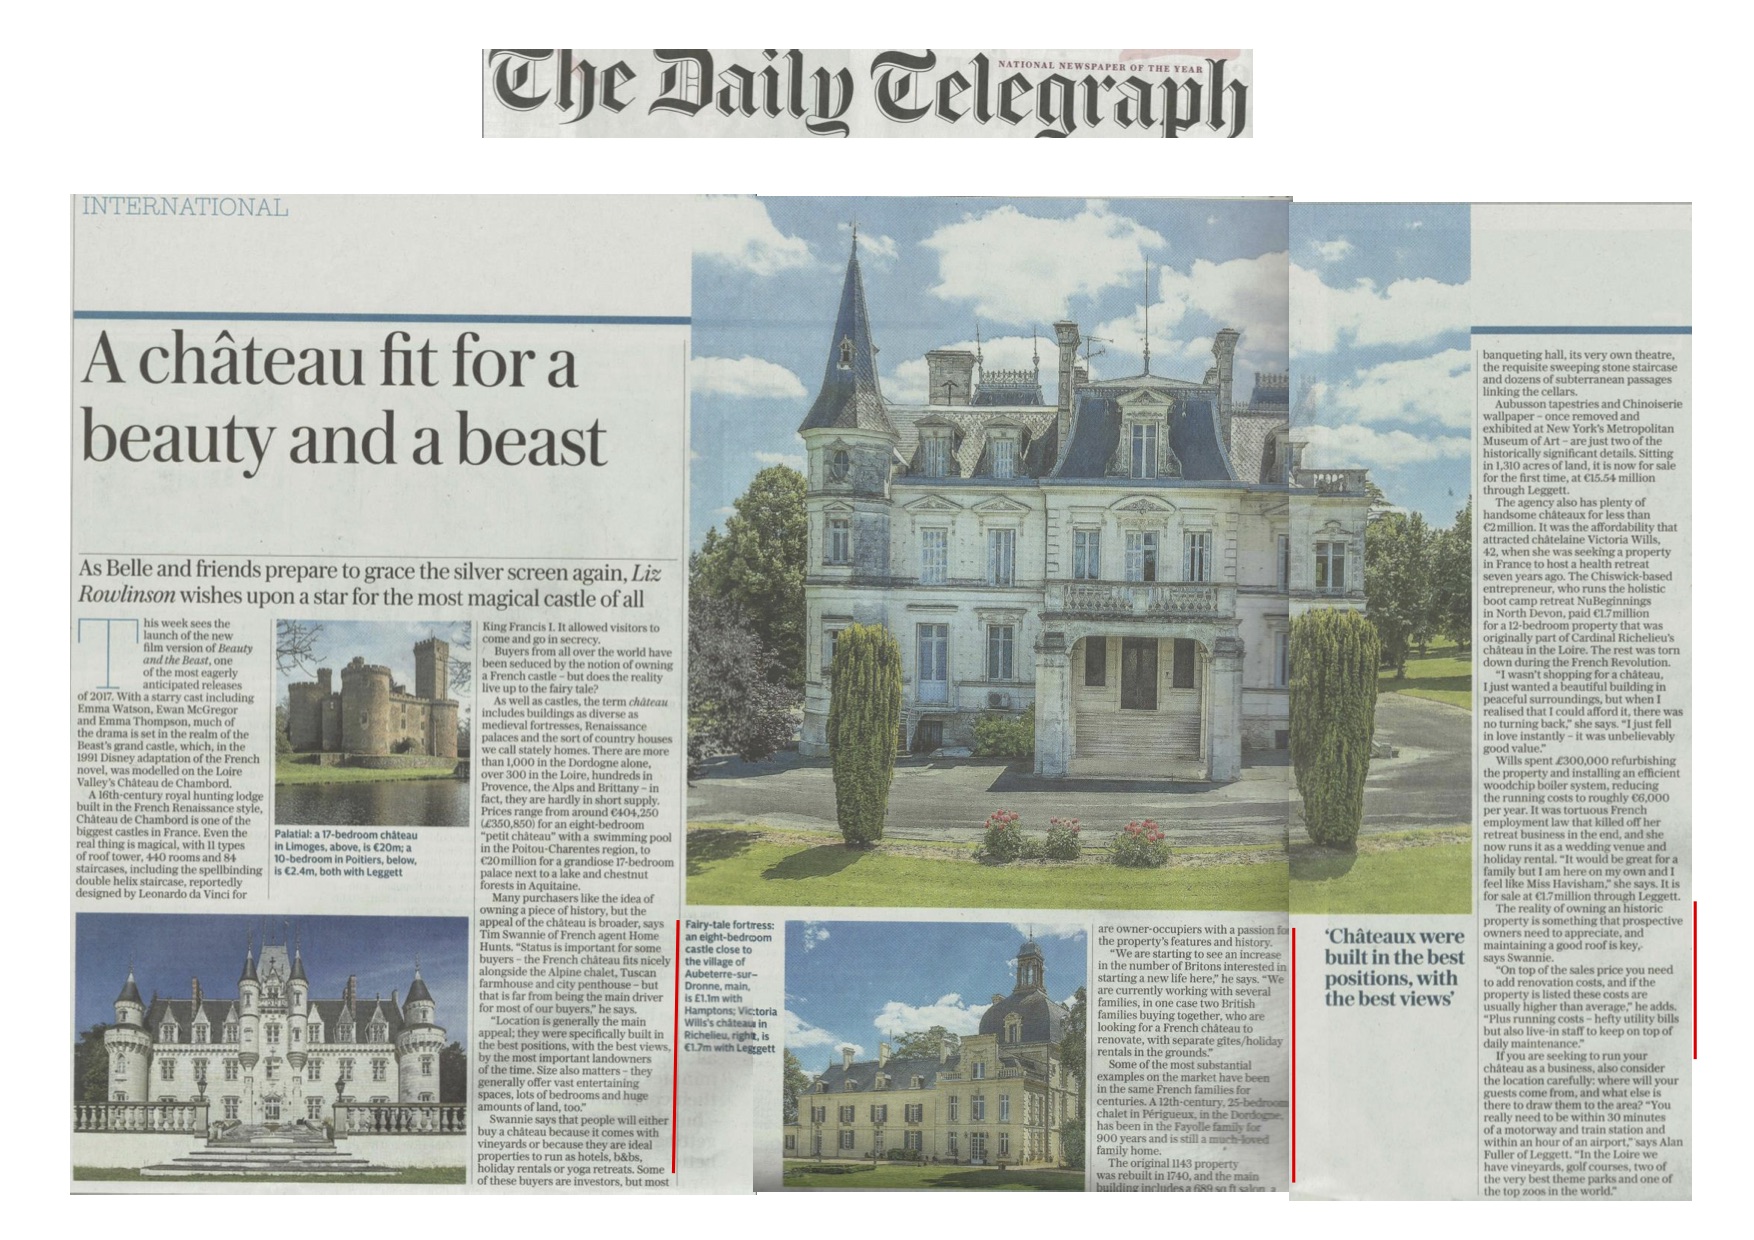 Telegraph – Fairytale French castles fit for a beauty (….or a beast)